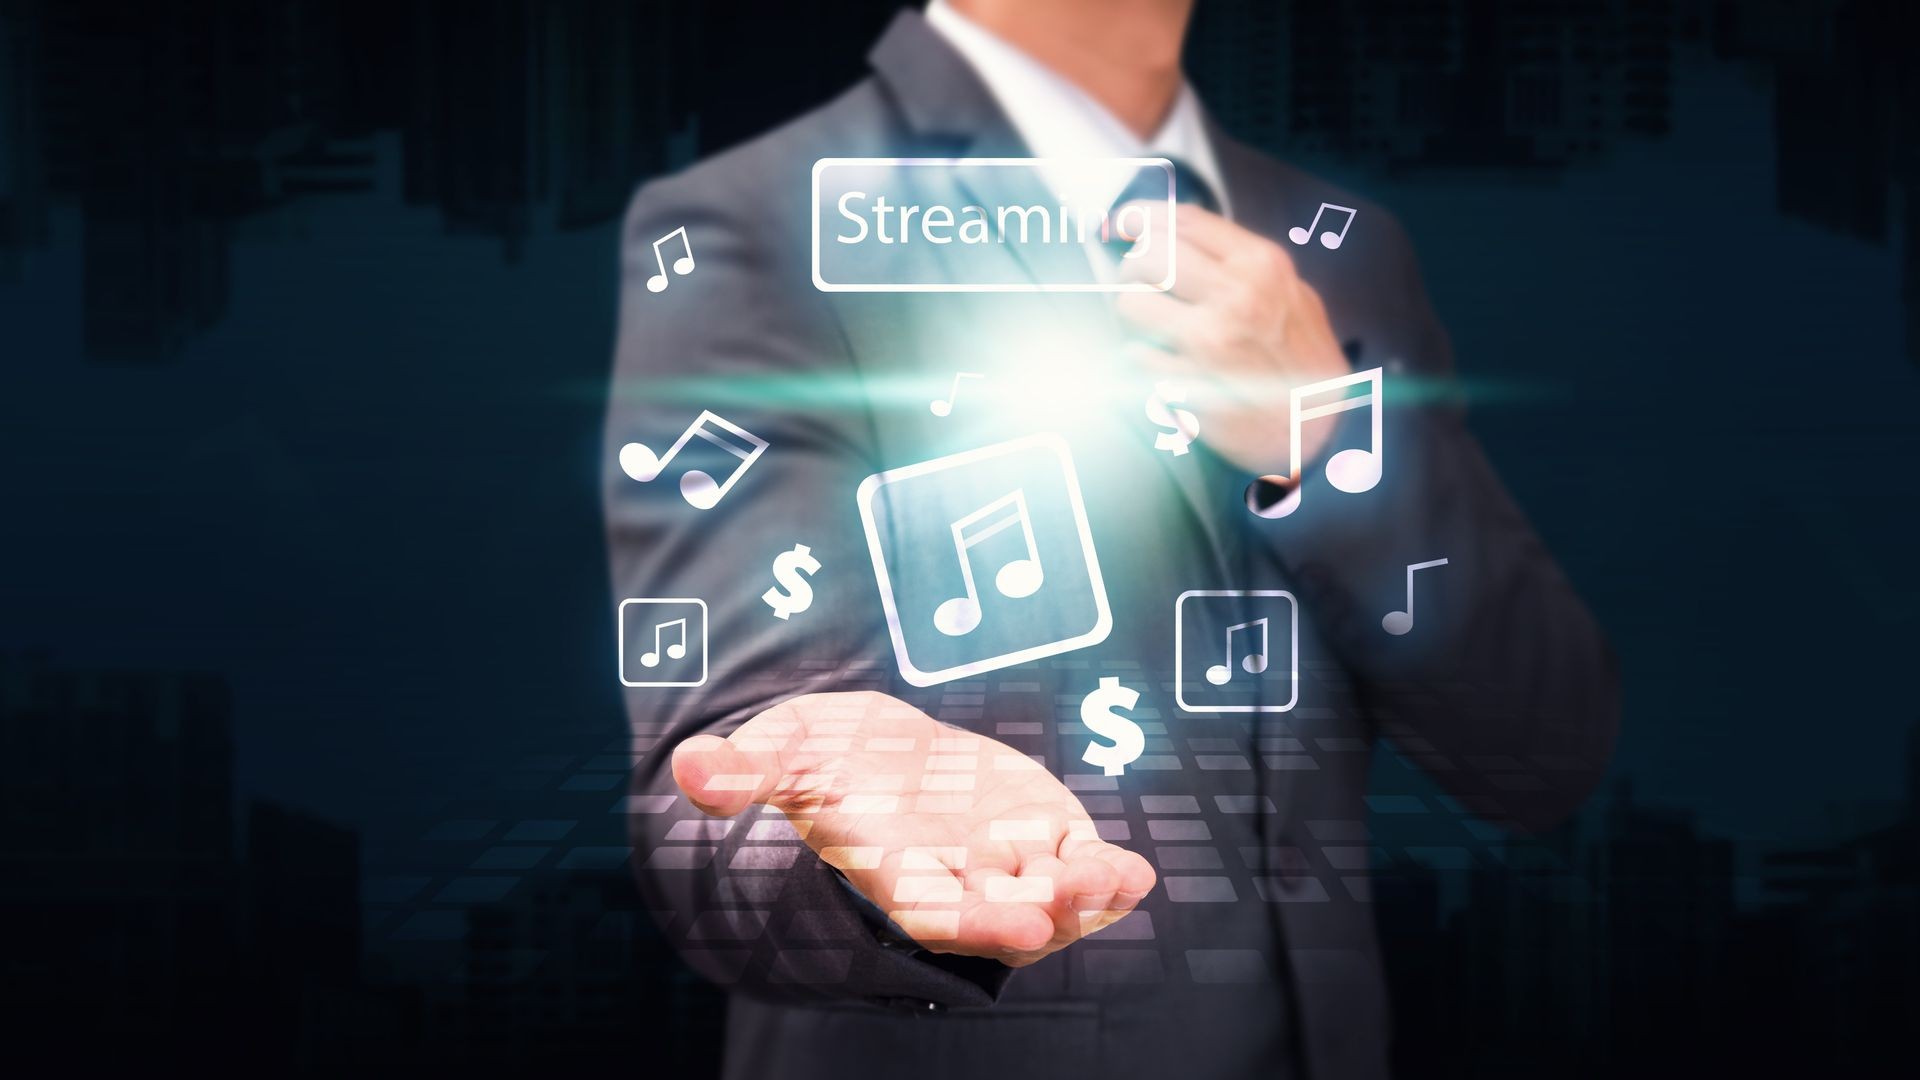 Music stream icon from business man